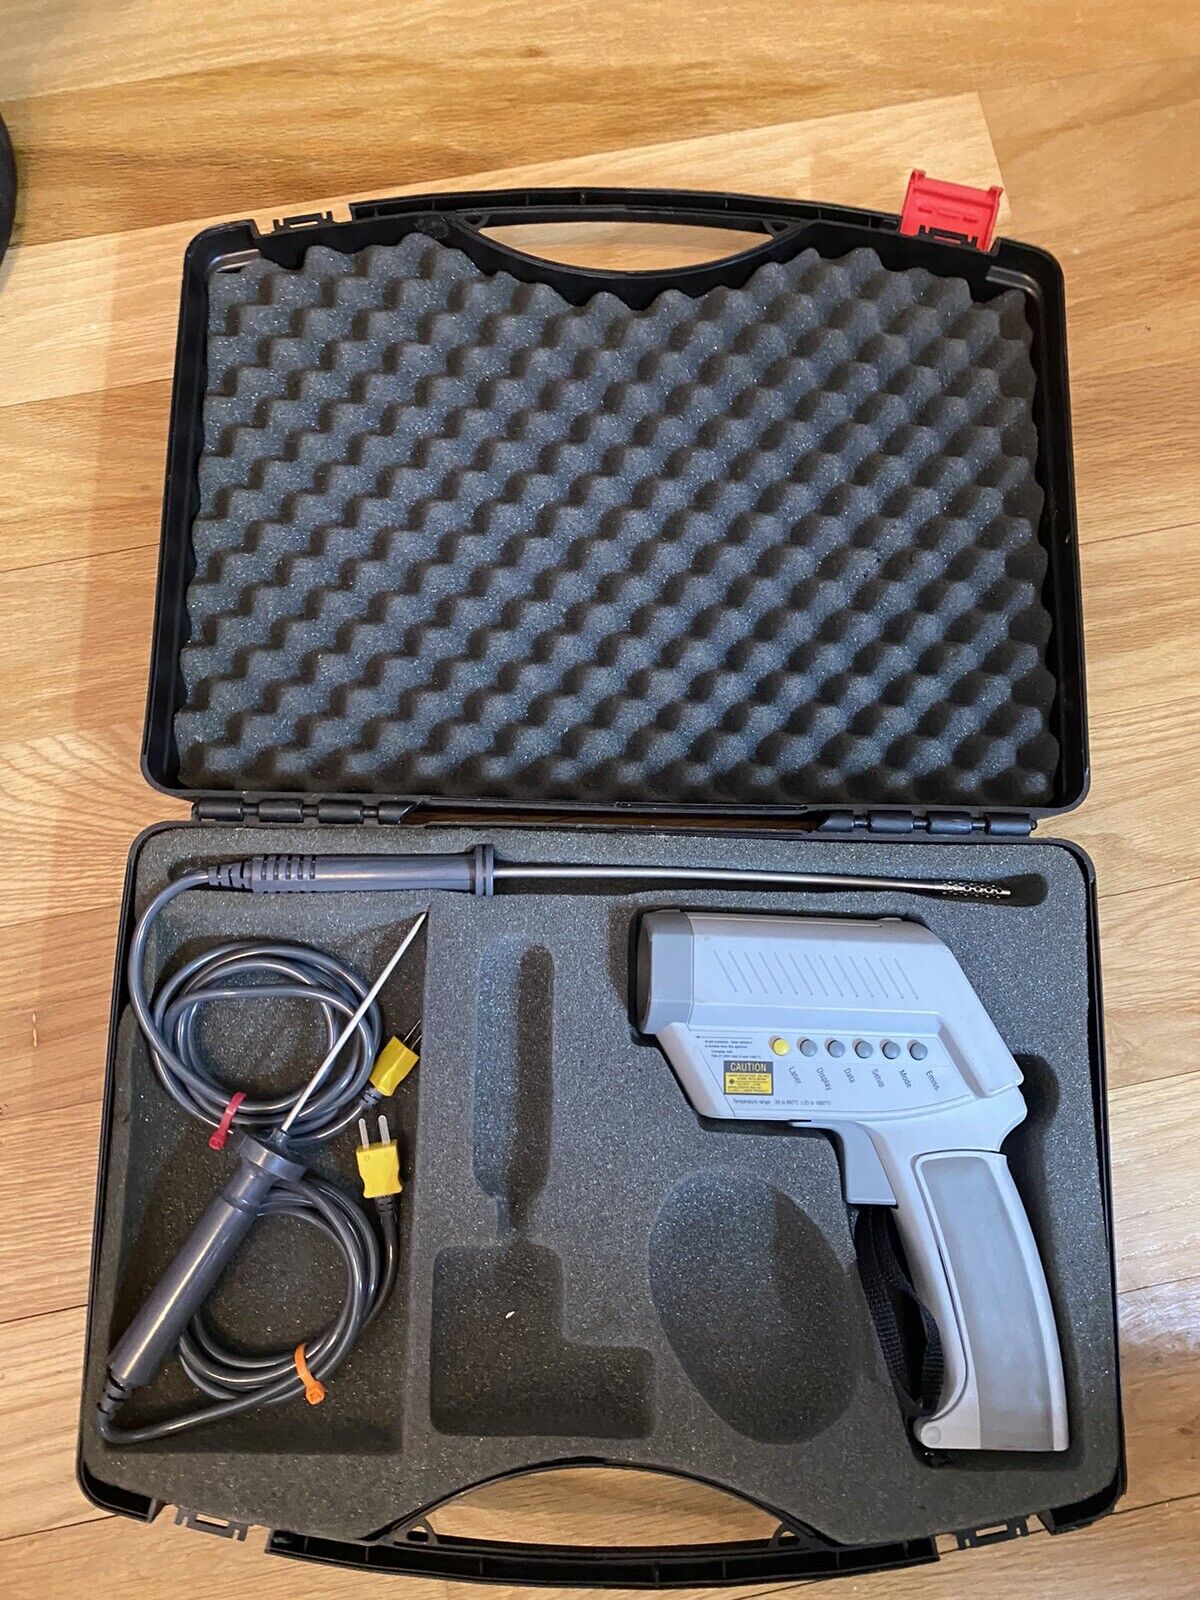 Raytek MX Infrared Thermometer with Fluke Accessories